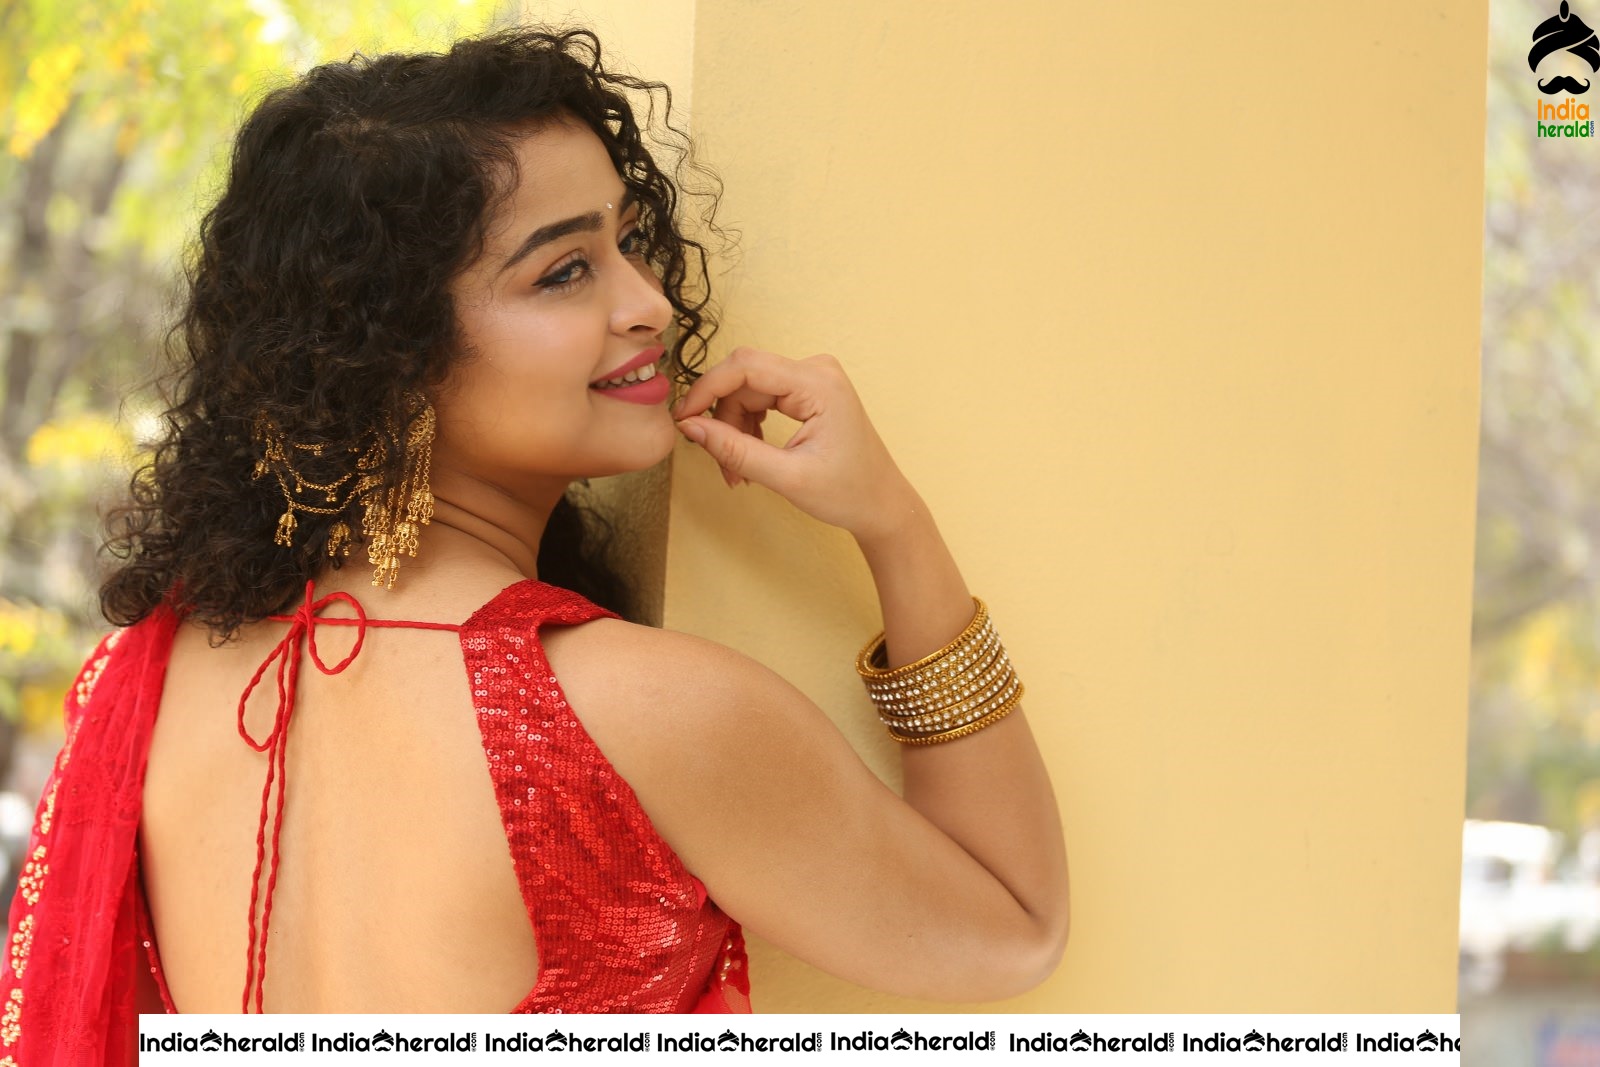 Ankeetha exposes her Hot Midriff and Navel in Saree during a Sexy Photoshoot